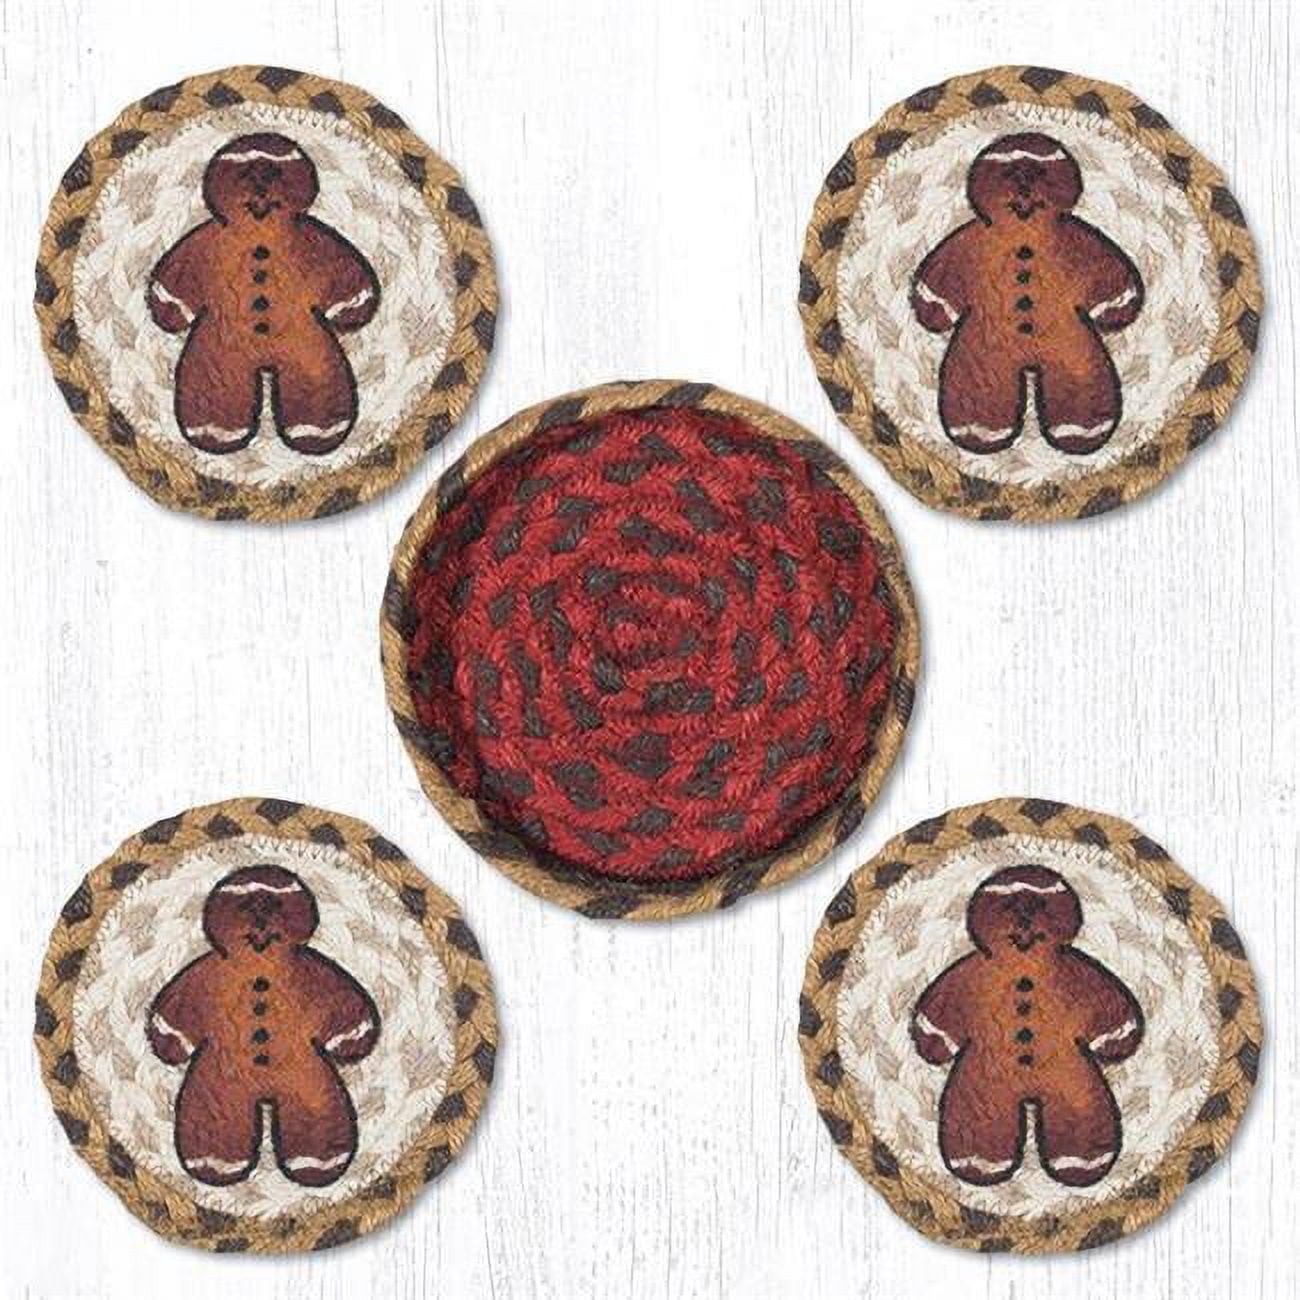 Capitol Importing 29-cb111gbm 5 In. Gingerbread Men Coaster Set